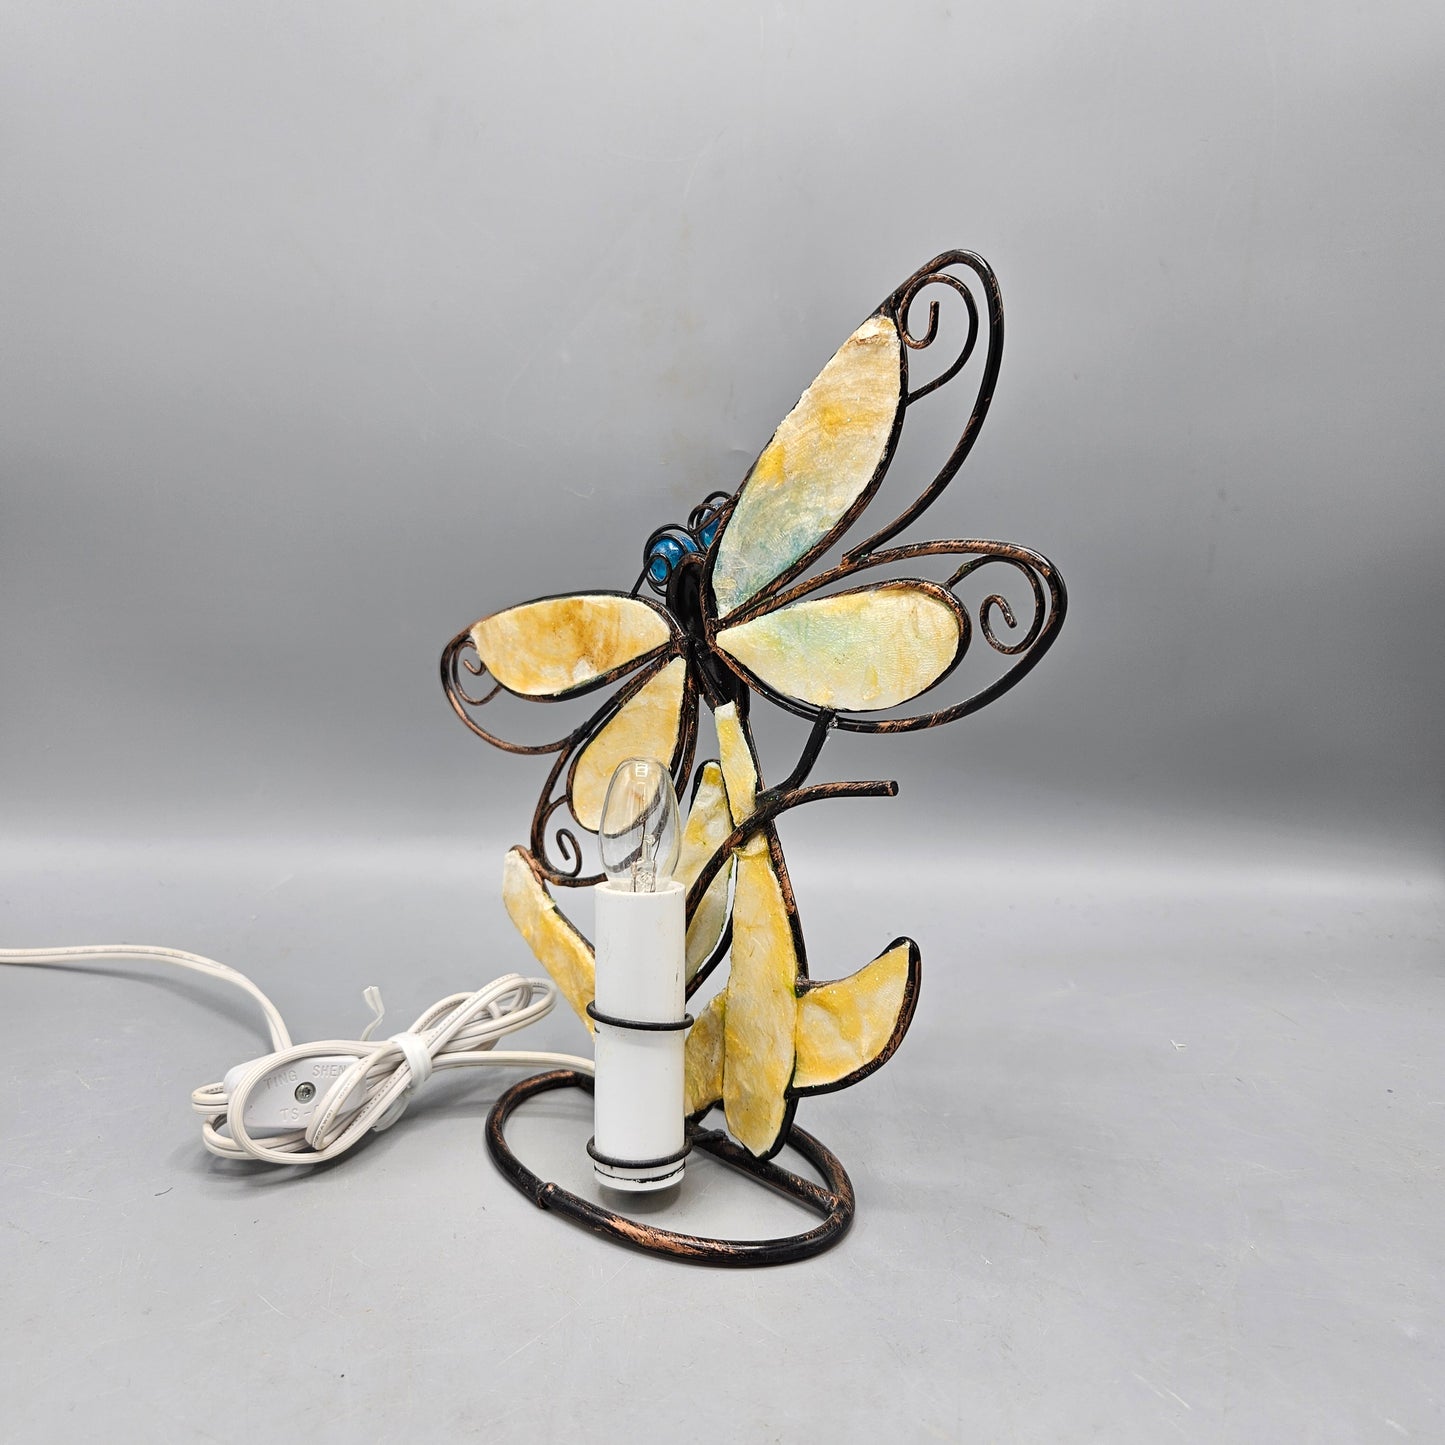 Adorable Stained Glass Dragonfly Light